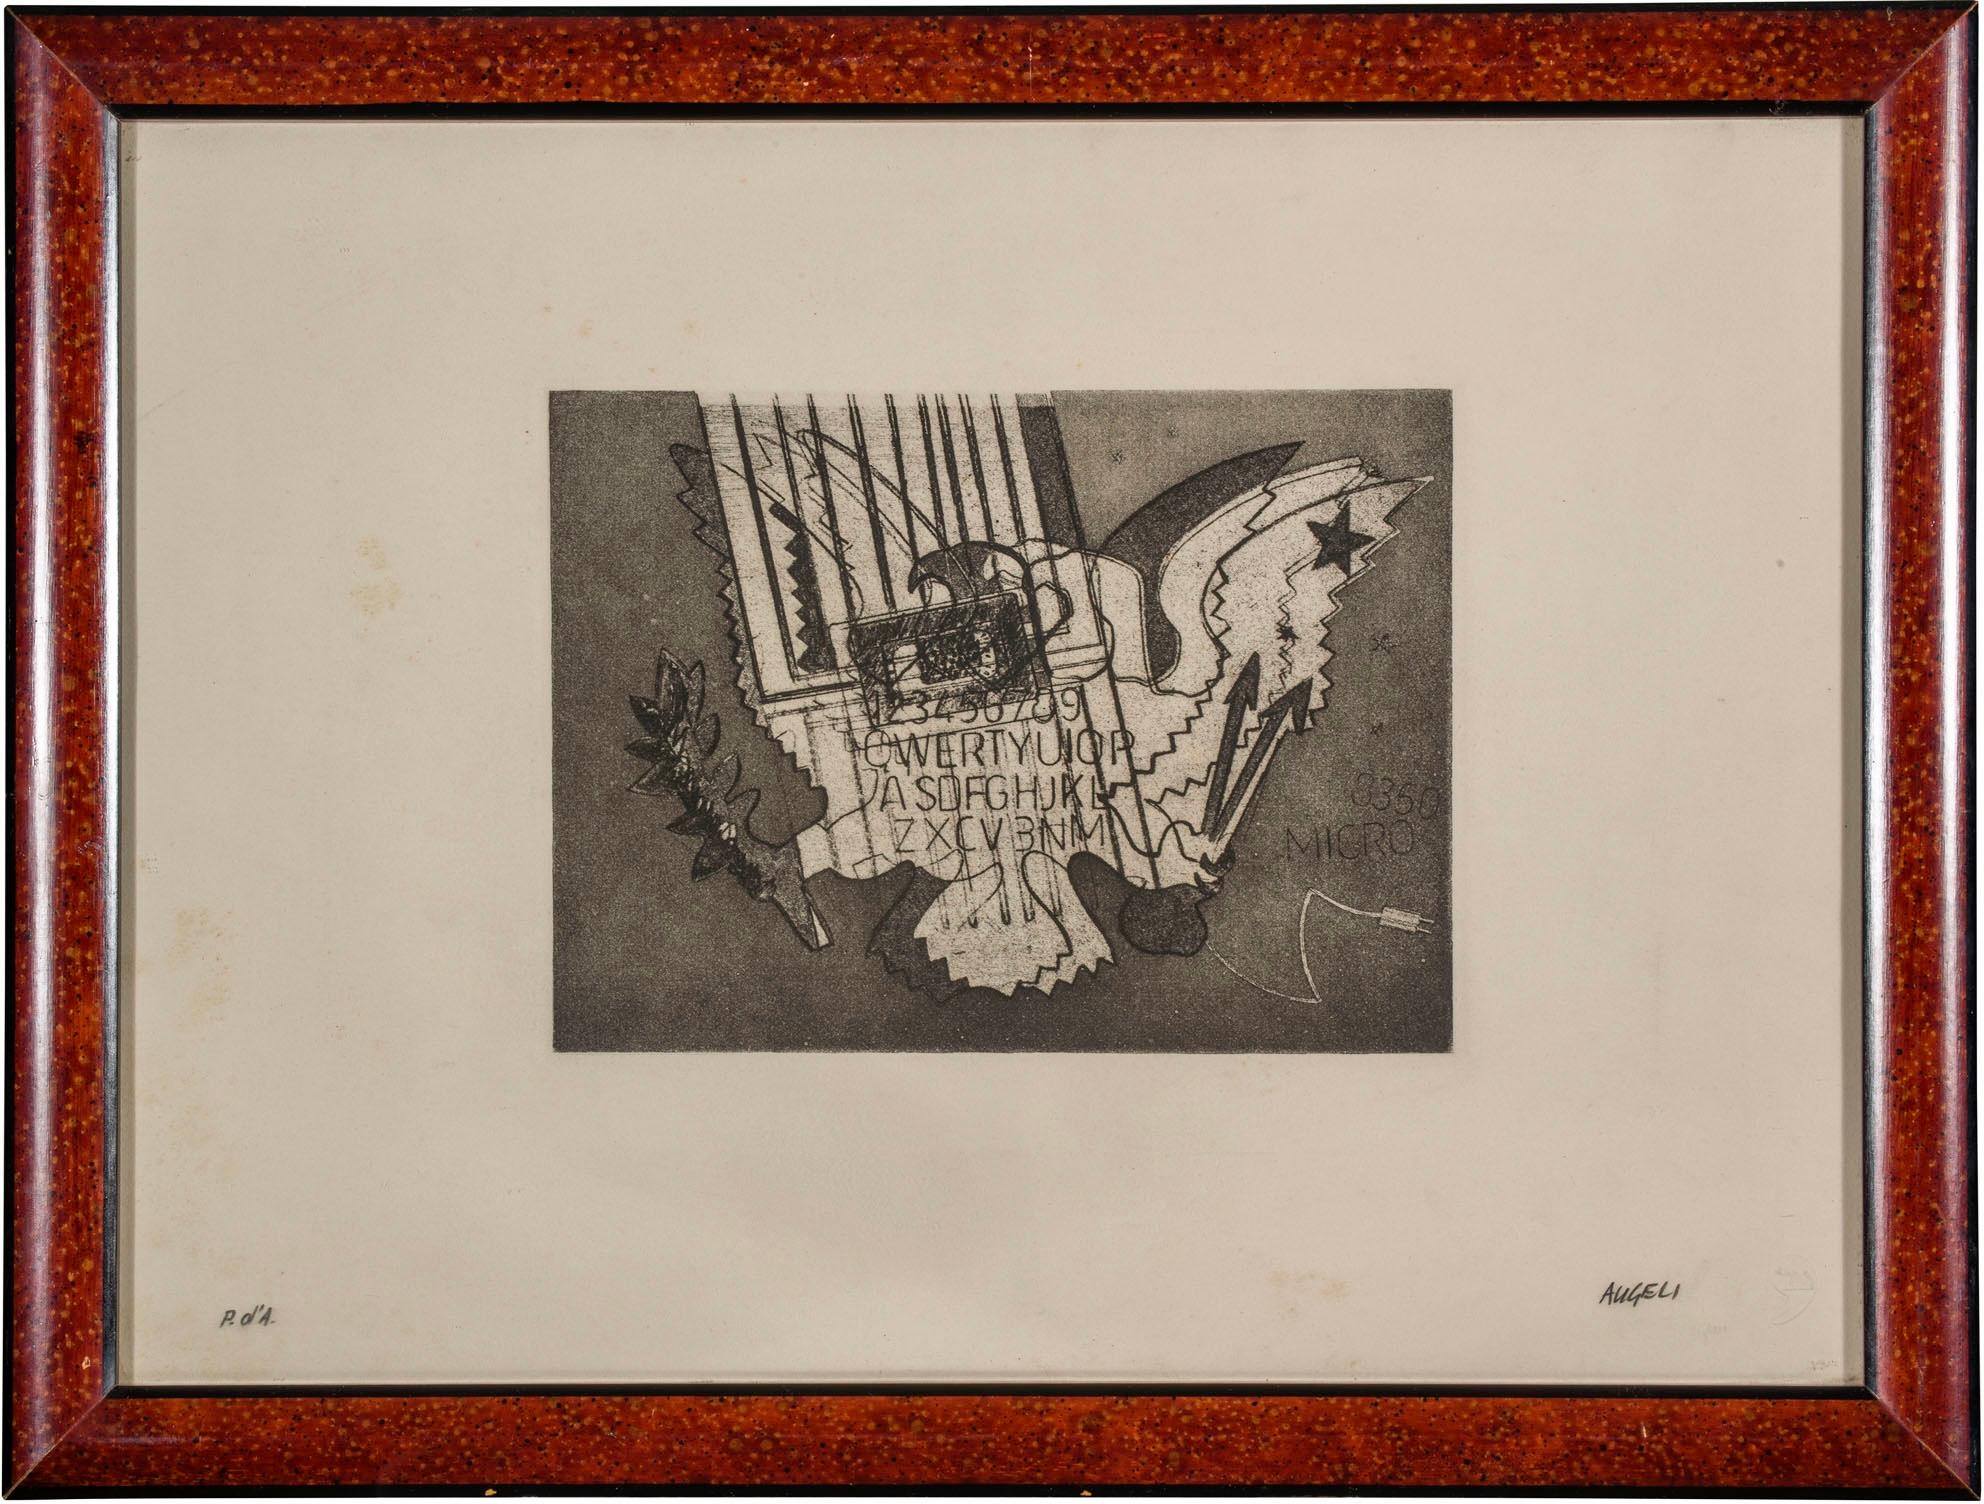 Beautiful work by Franco Angeli leading exponent of the Piazza del Popolo School “Roman eagle”
Dry stamp 
Signed lower right in pencil by the Artist. 
“Prova d’Artista” Artist's proof by Franco Angeli

This artwork, never before on the market, comes